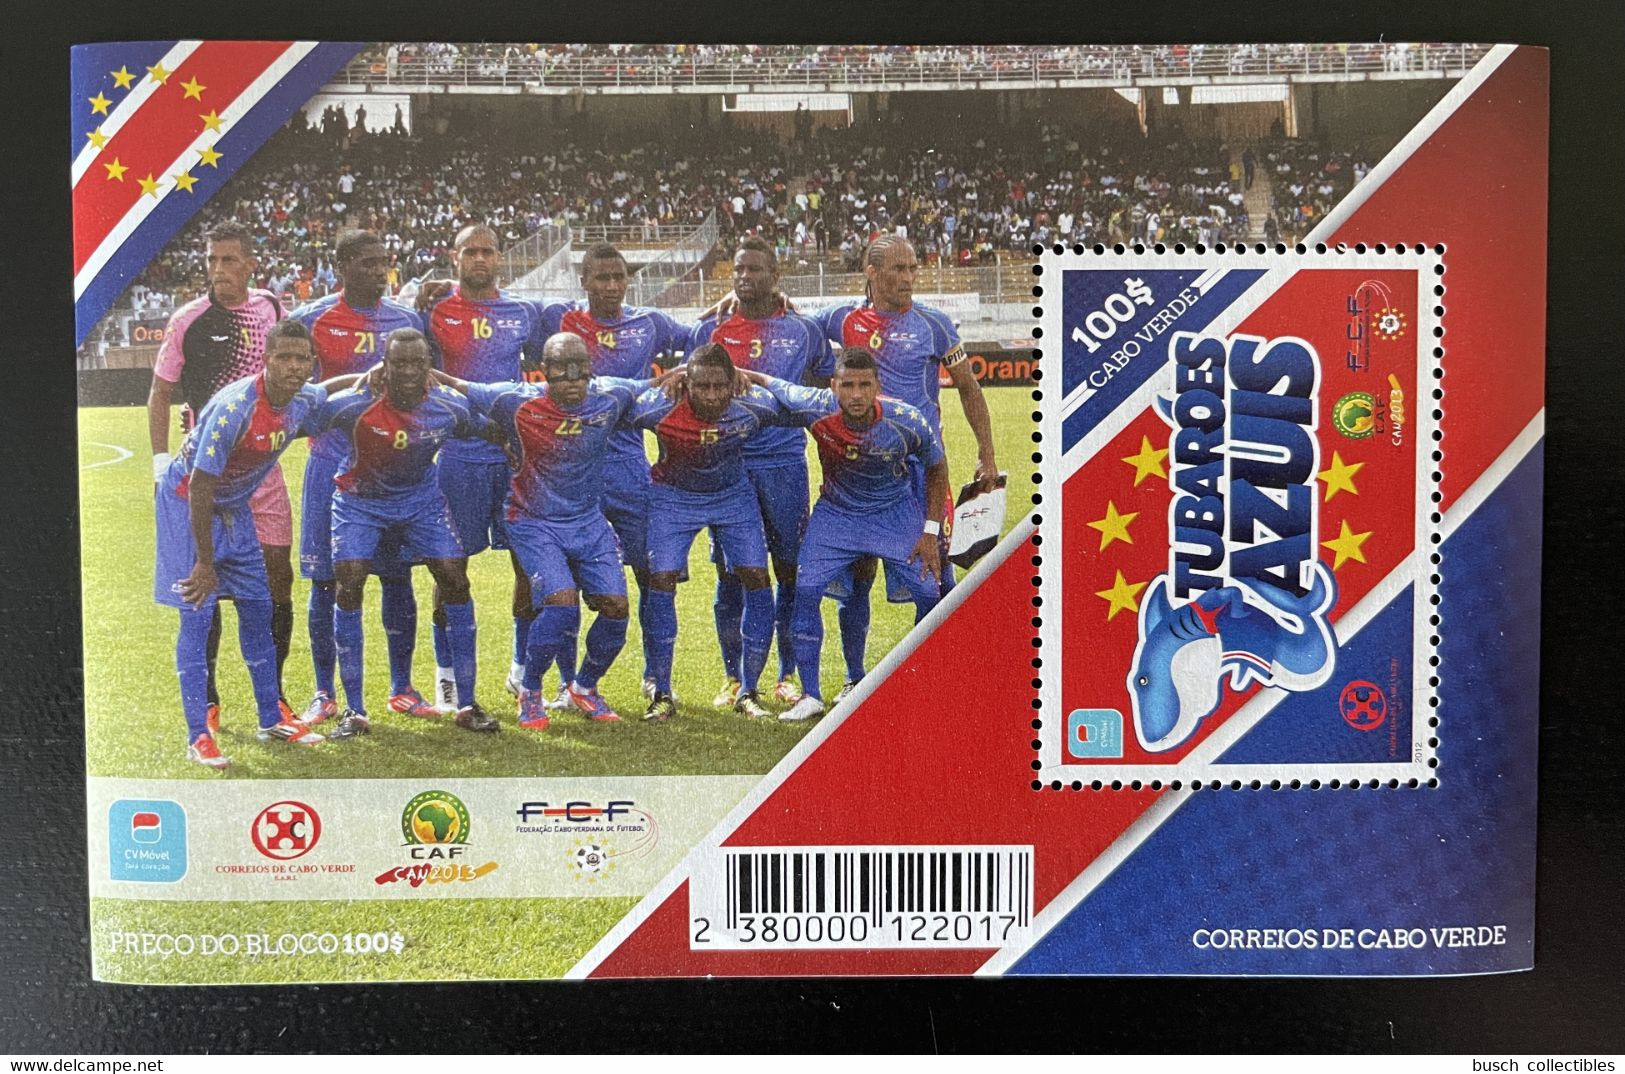 Cape Verde Cabo Verde 2012 Mi. Bl. 45 Football Fußball Soccer Tubaroes Azul CAN Africa Cup 2013 - Cape Verde